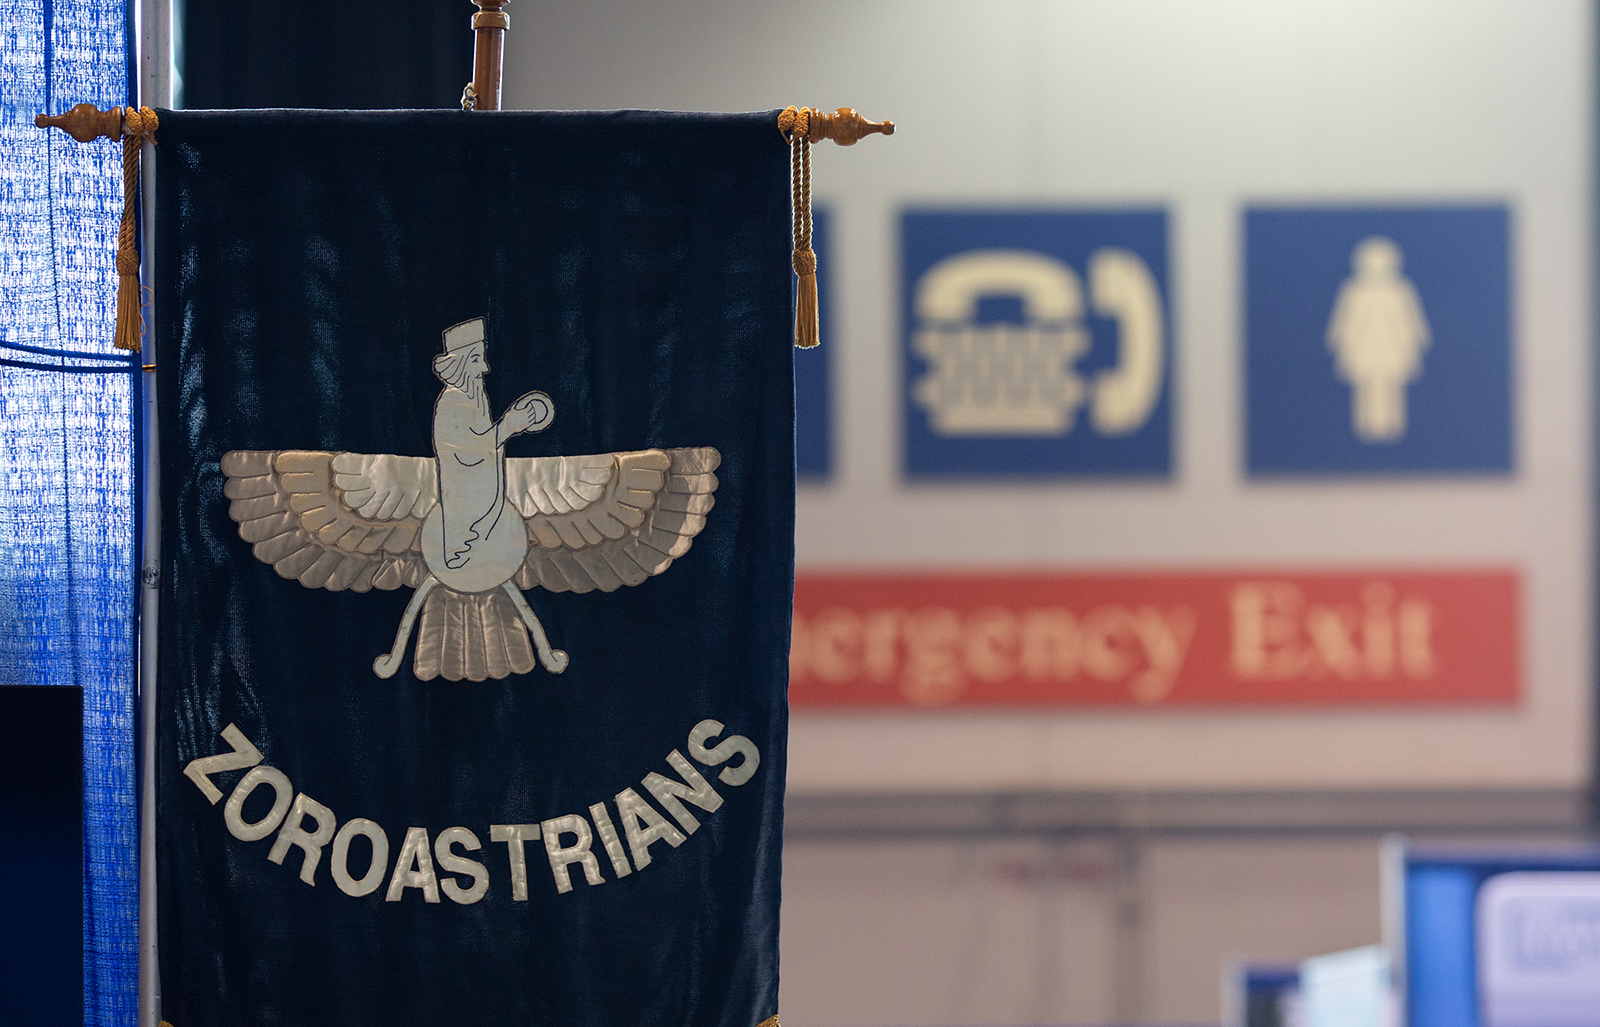 A Zoroastrian flag in the exhibit hall of the Parliament of the World's Religions in Chicago on August 15, 2023. Photo by Lauren Pond for RNS